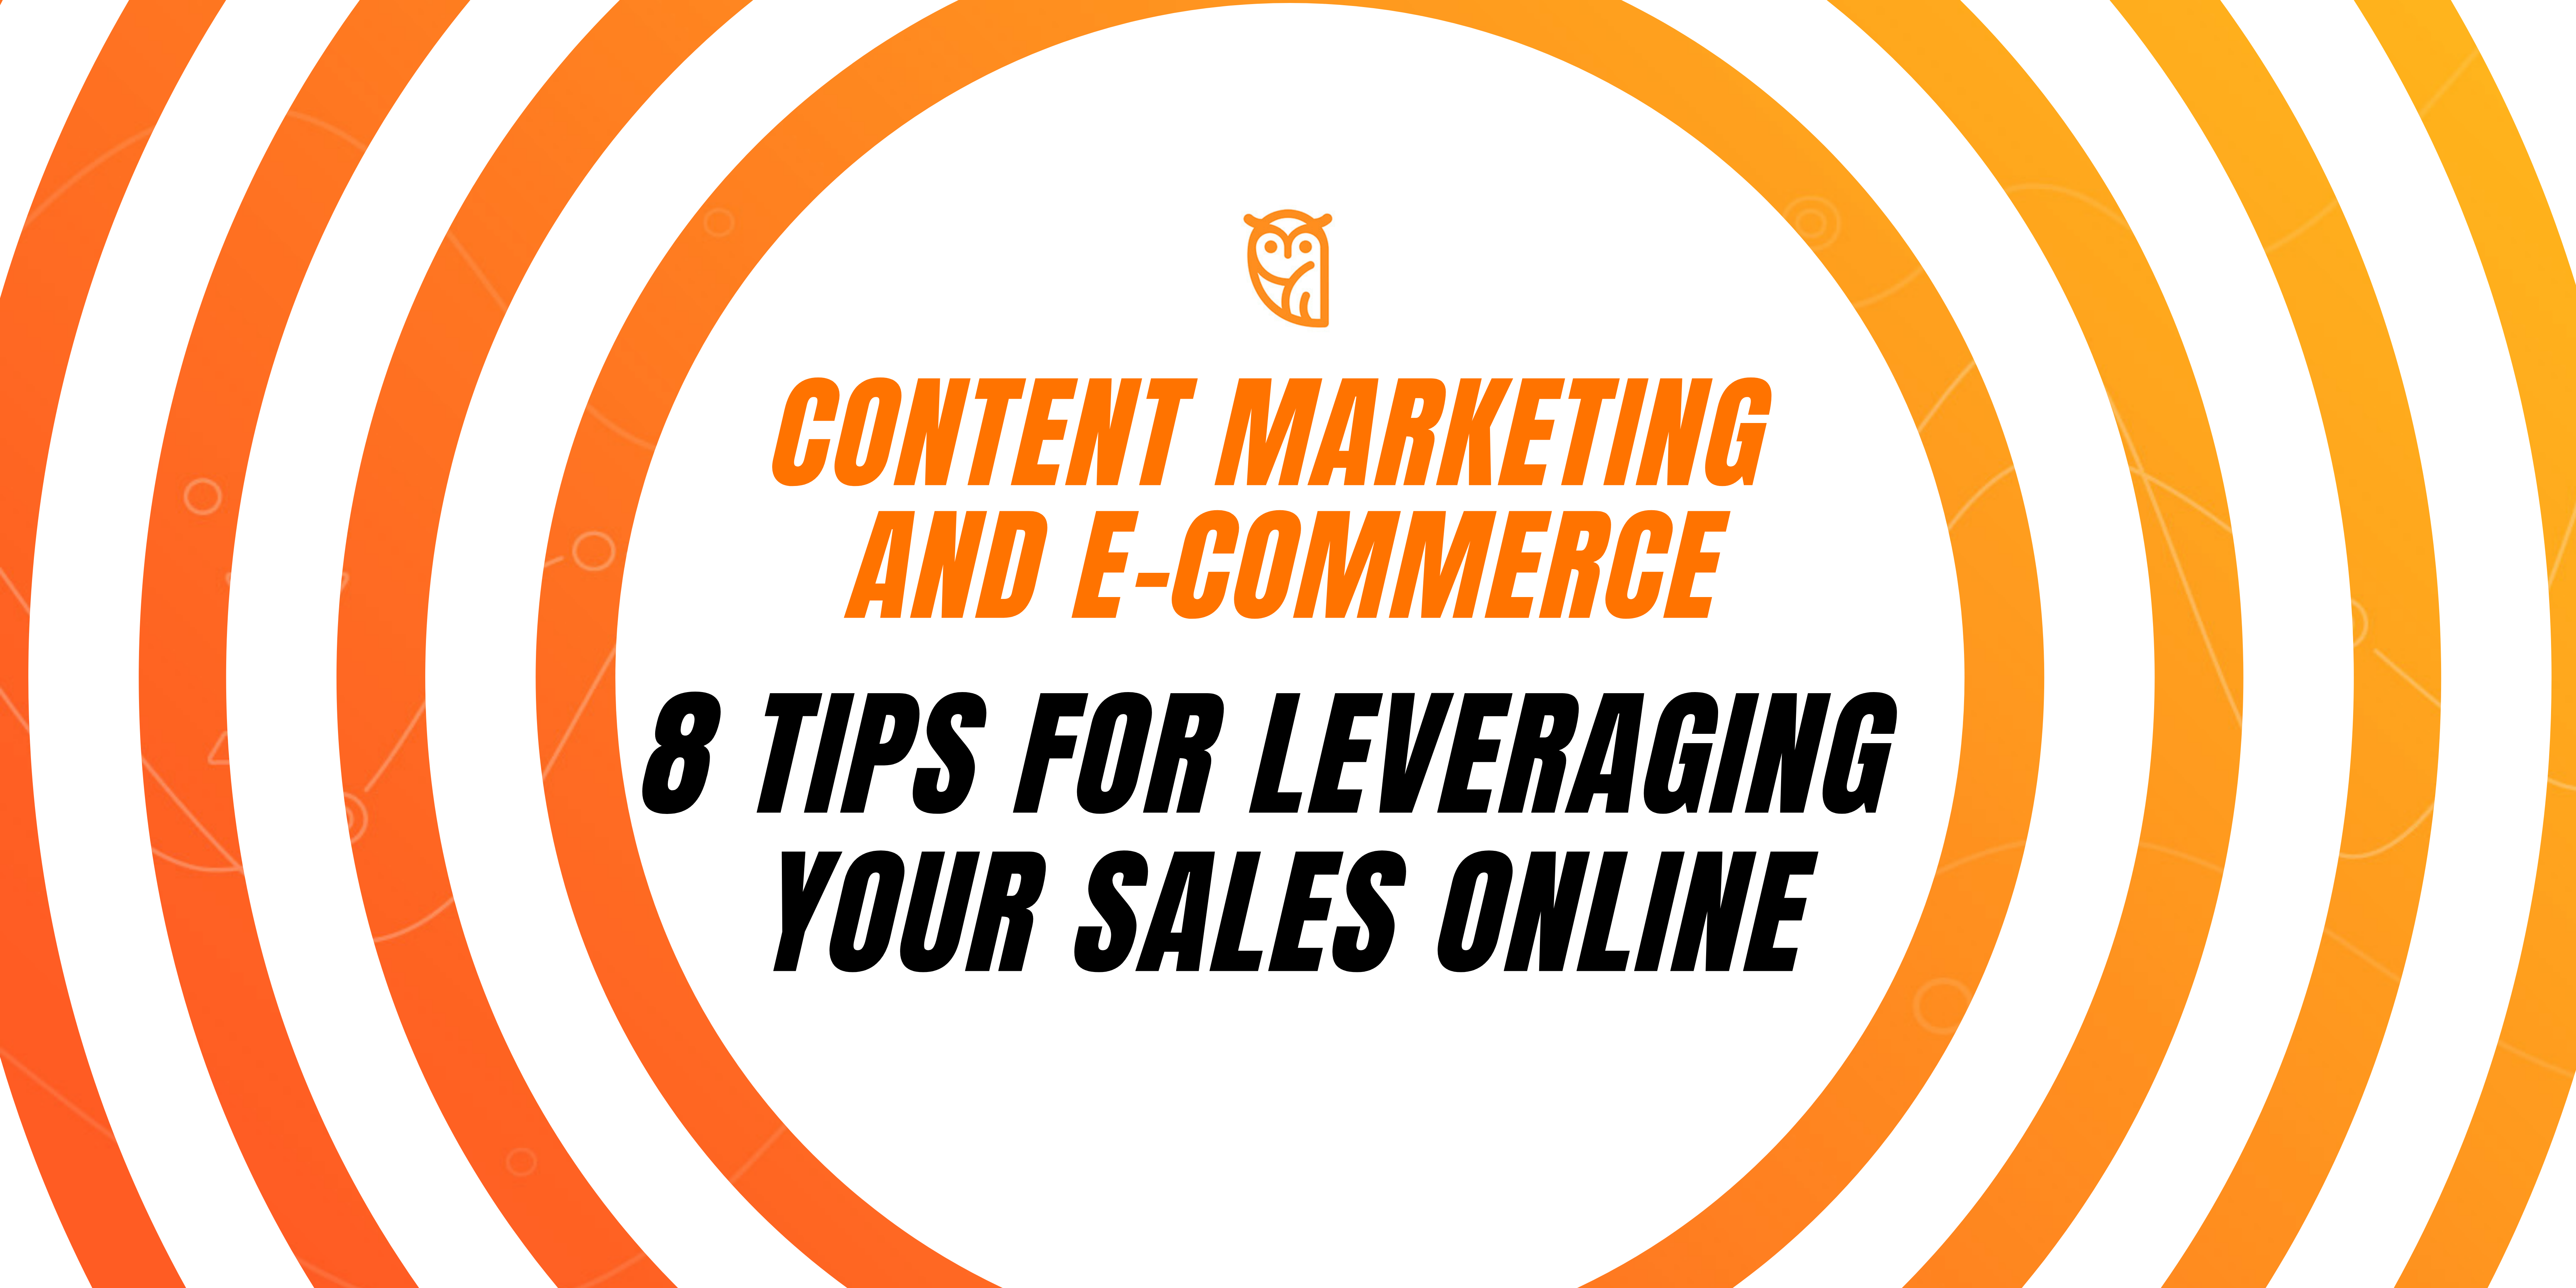 Content marketing and ecommerce tips